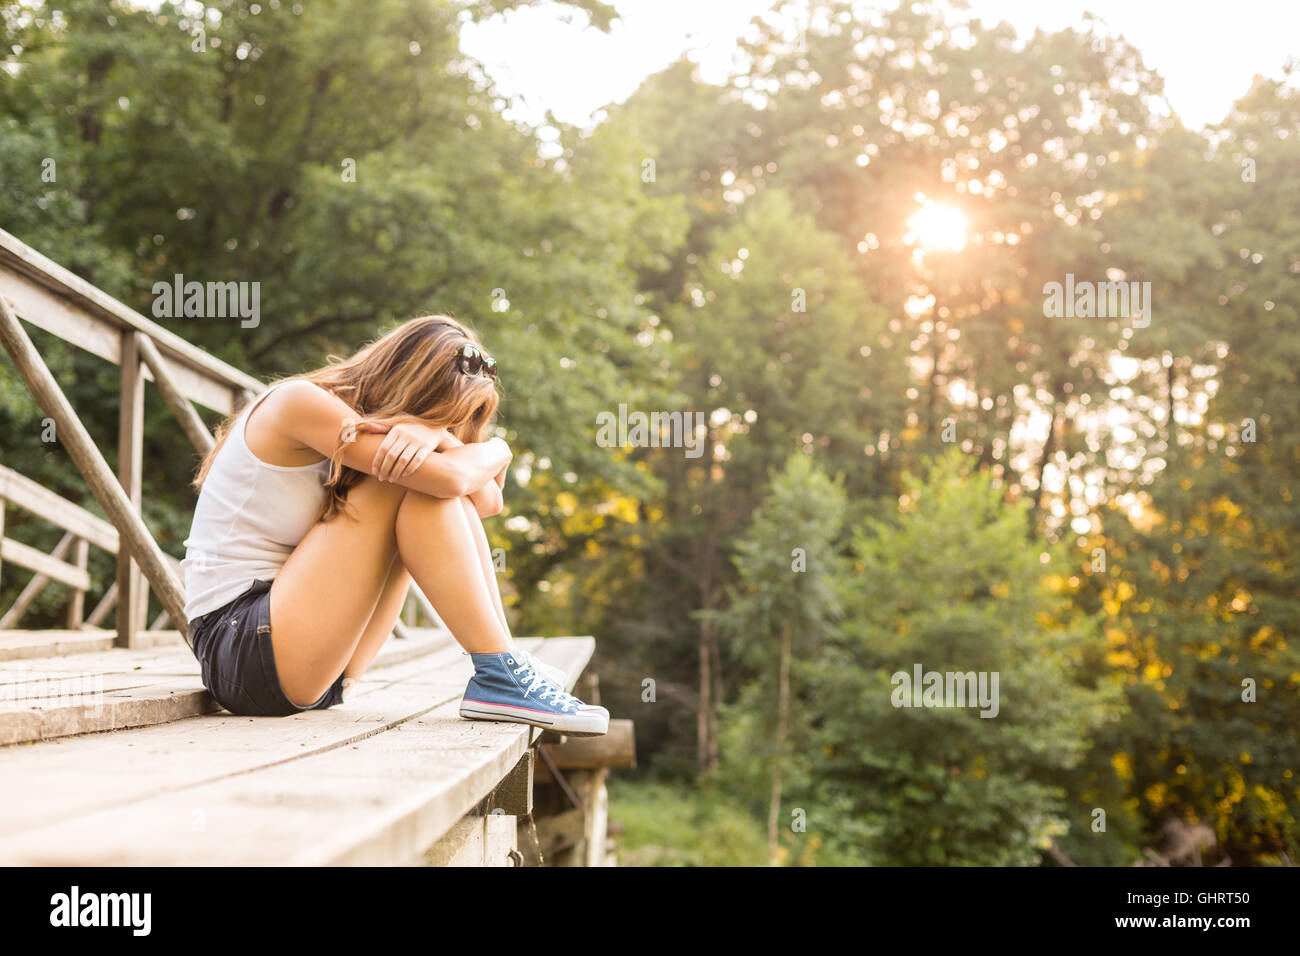 Young sad woman with beautiful sporty legs sitting on a wooden bridge railing in jeans sneakers Stock Photo